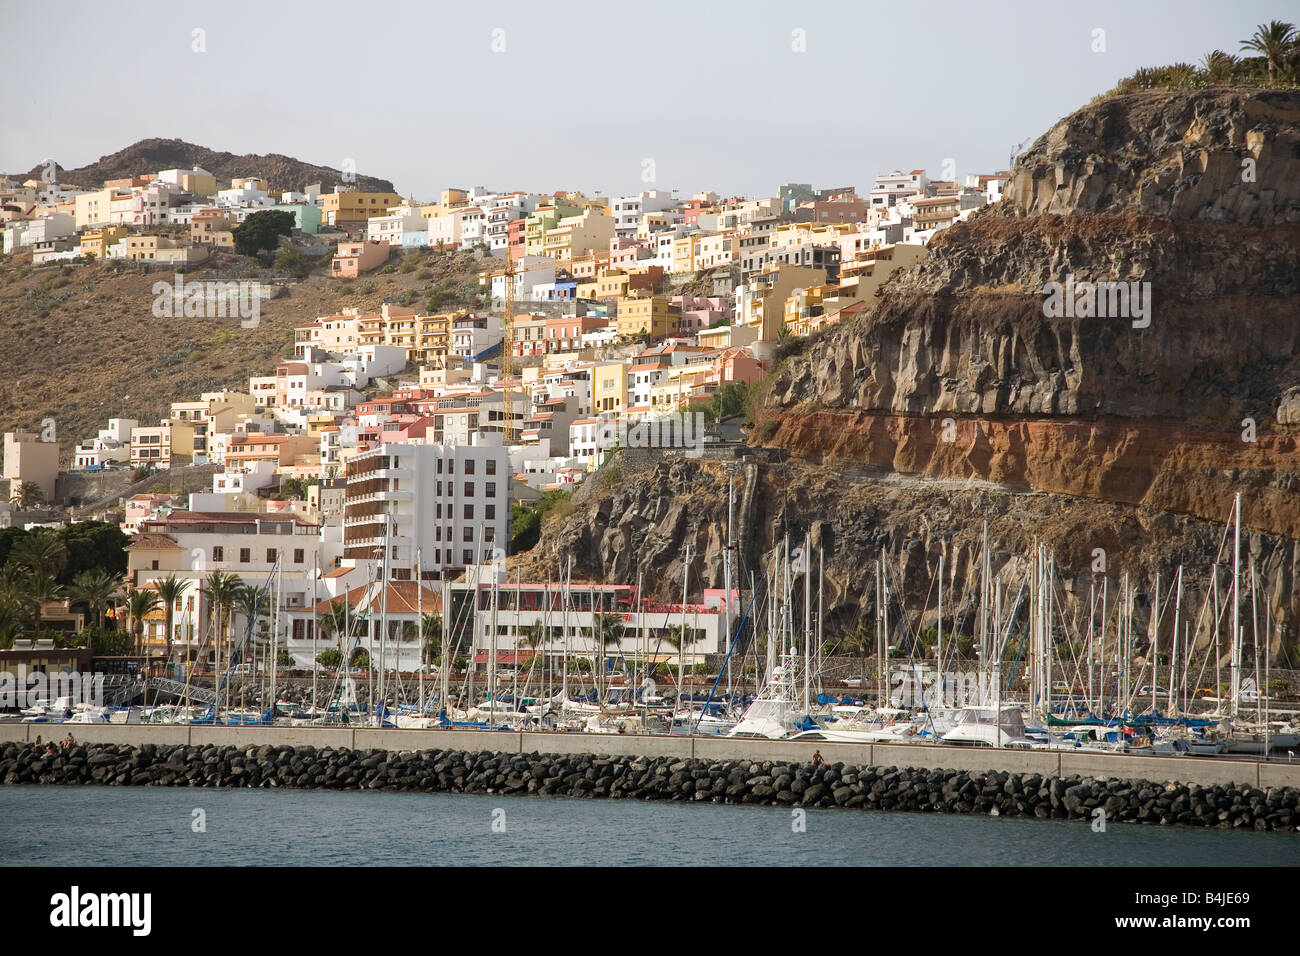 The Spanish town and harbour of San Sebastion on the Island of La Gomara The second smallest of the Canary Islands Stock Photo